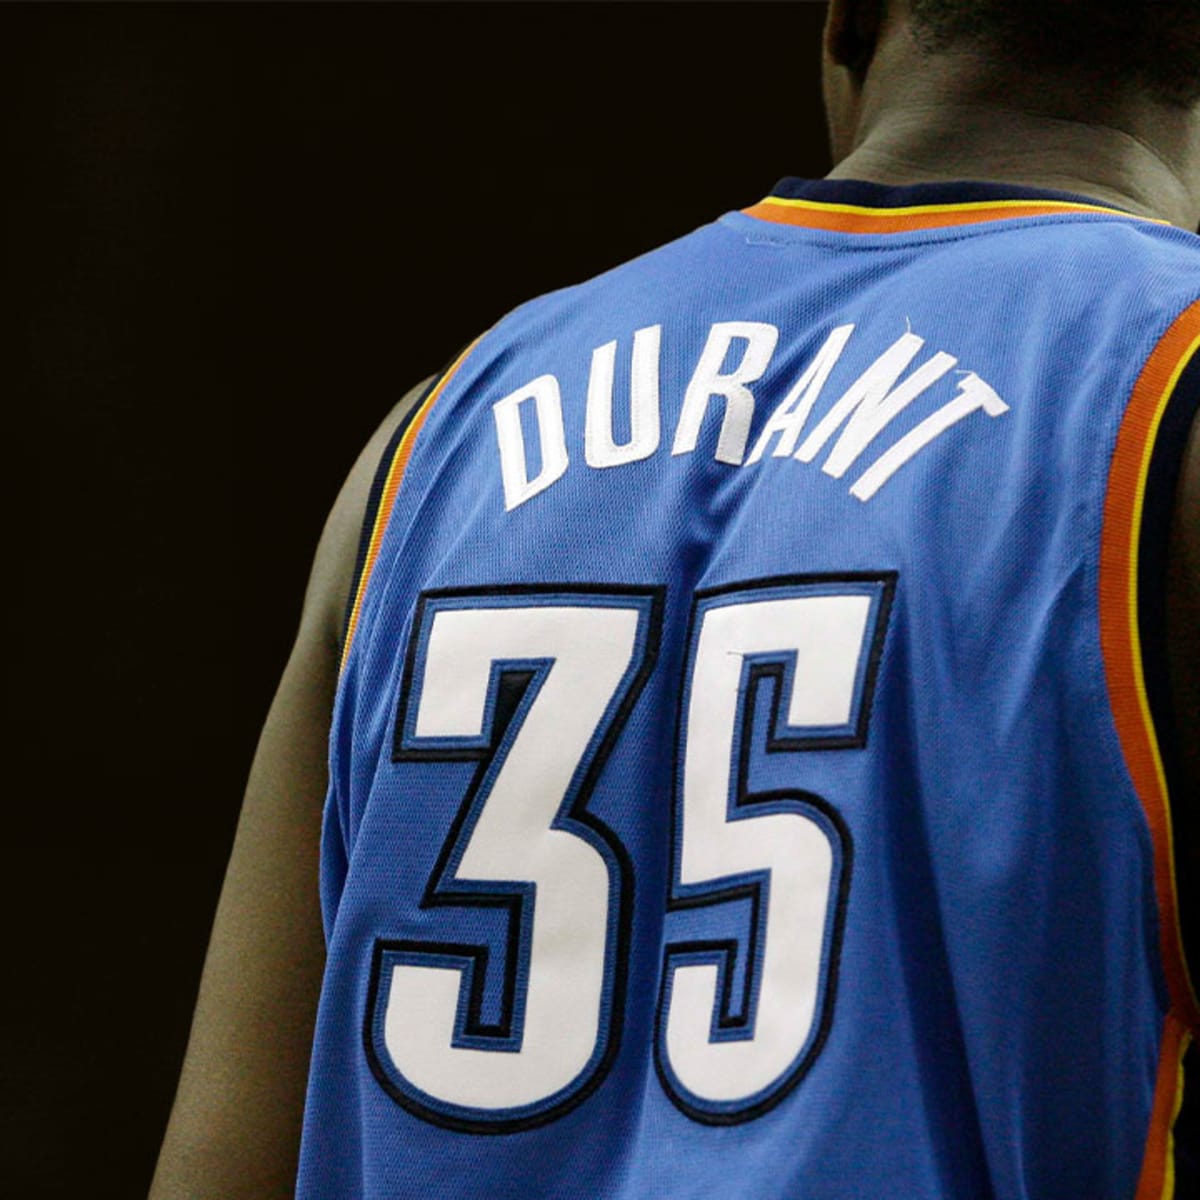 The heartbreaking story why Kevin Durant wears no. 35 - Basketball Network  - Your daily dose of basketball